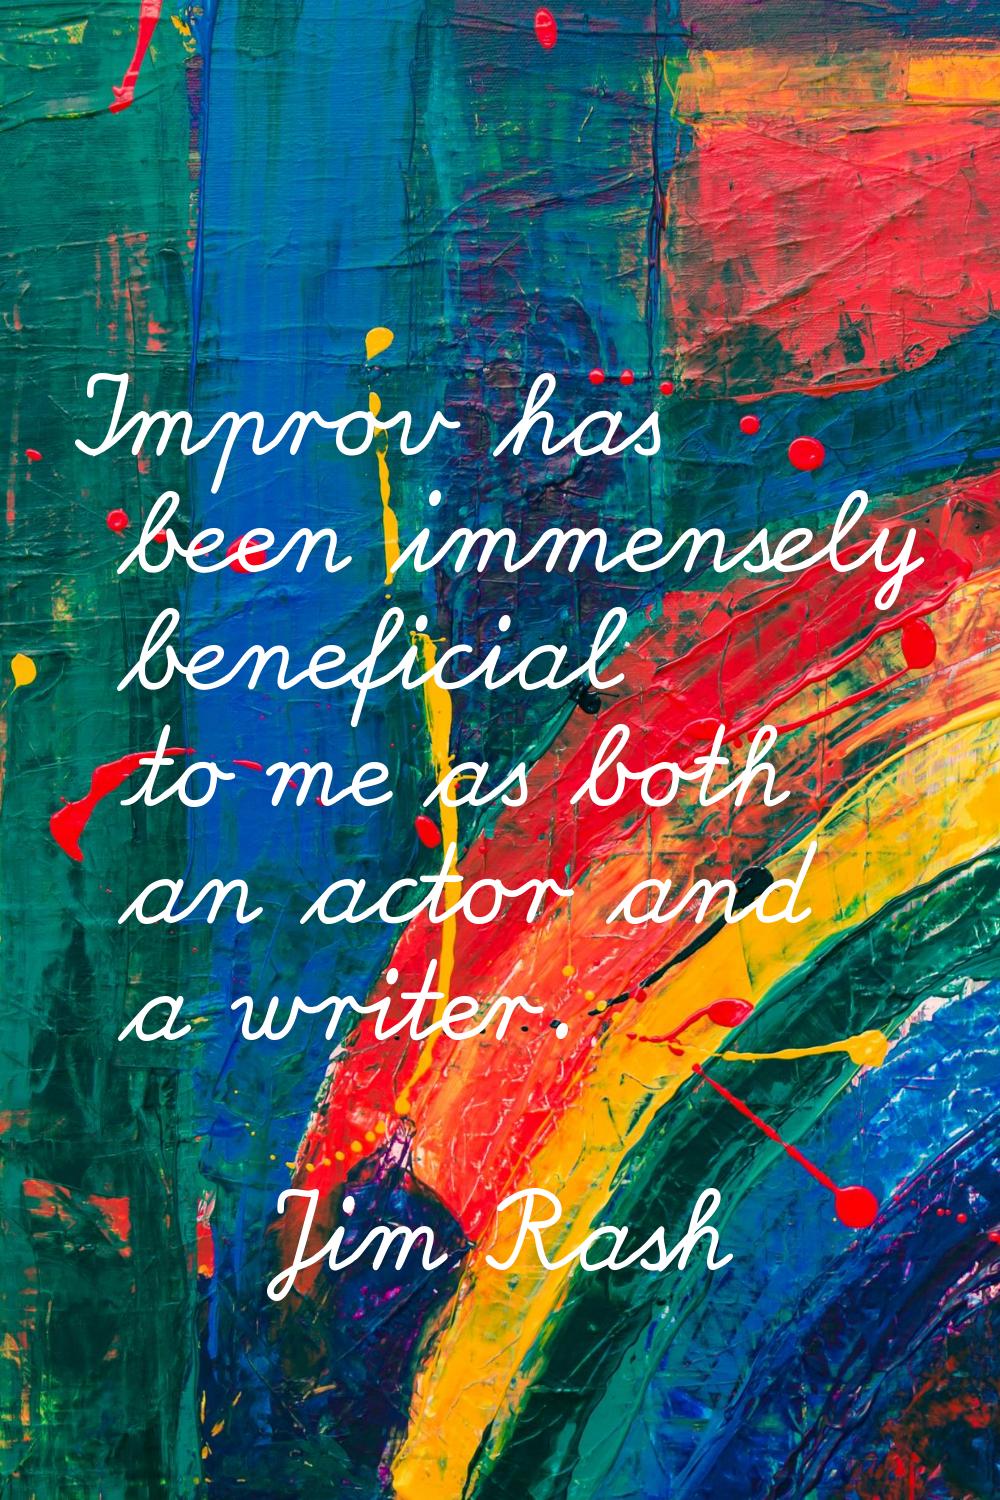 Improv has been immensely beneficial to me as both an actor and a writer.